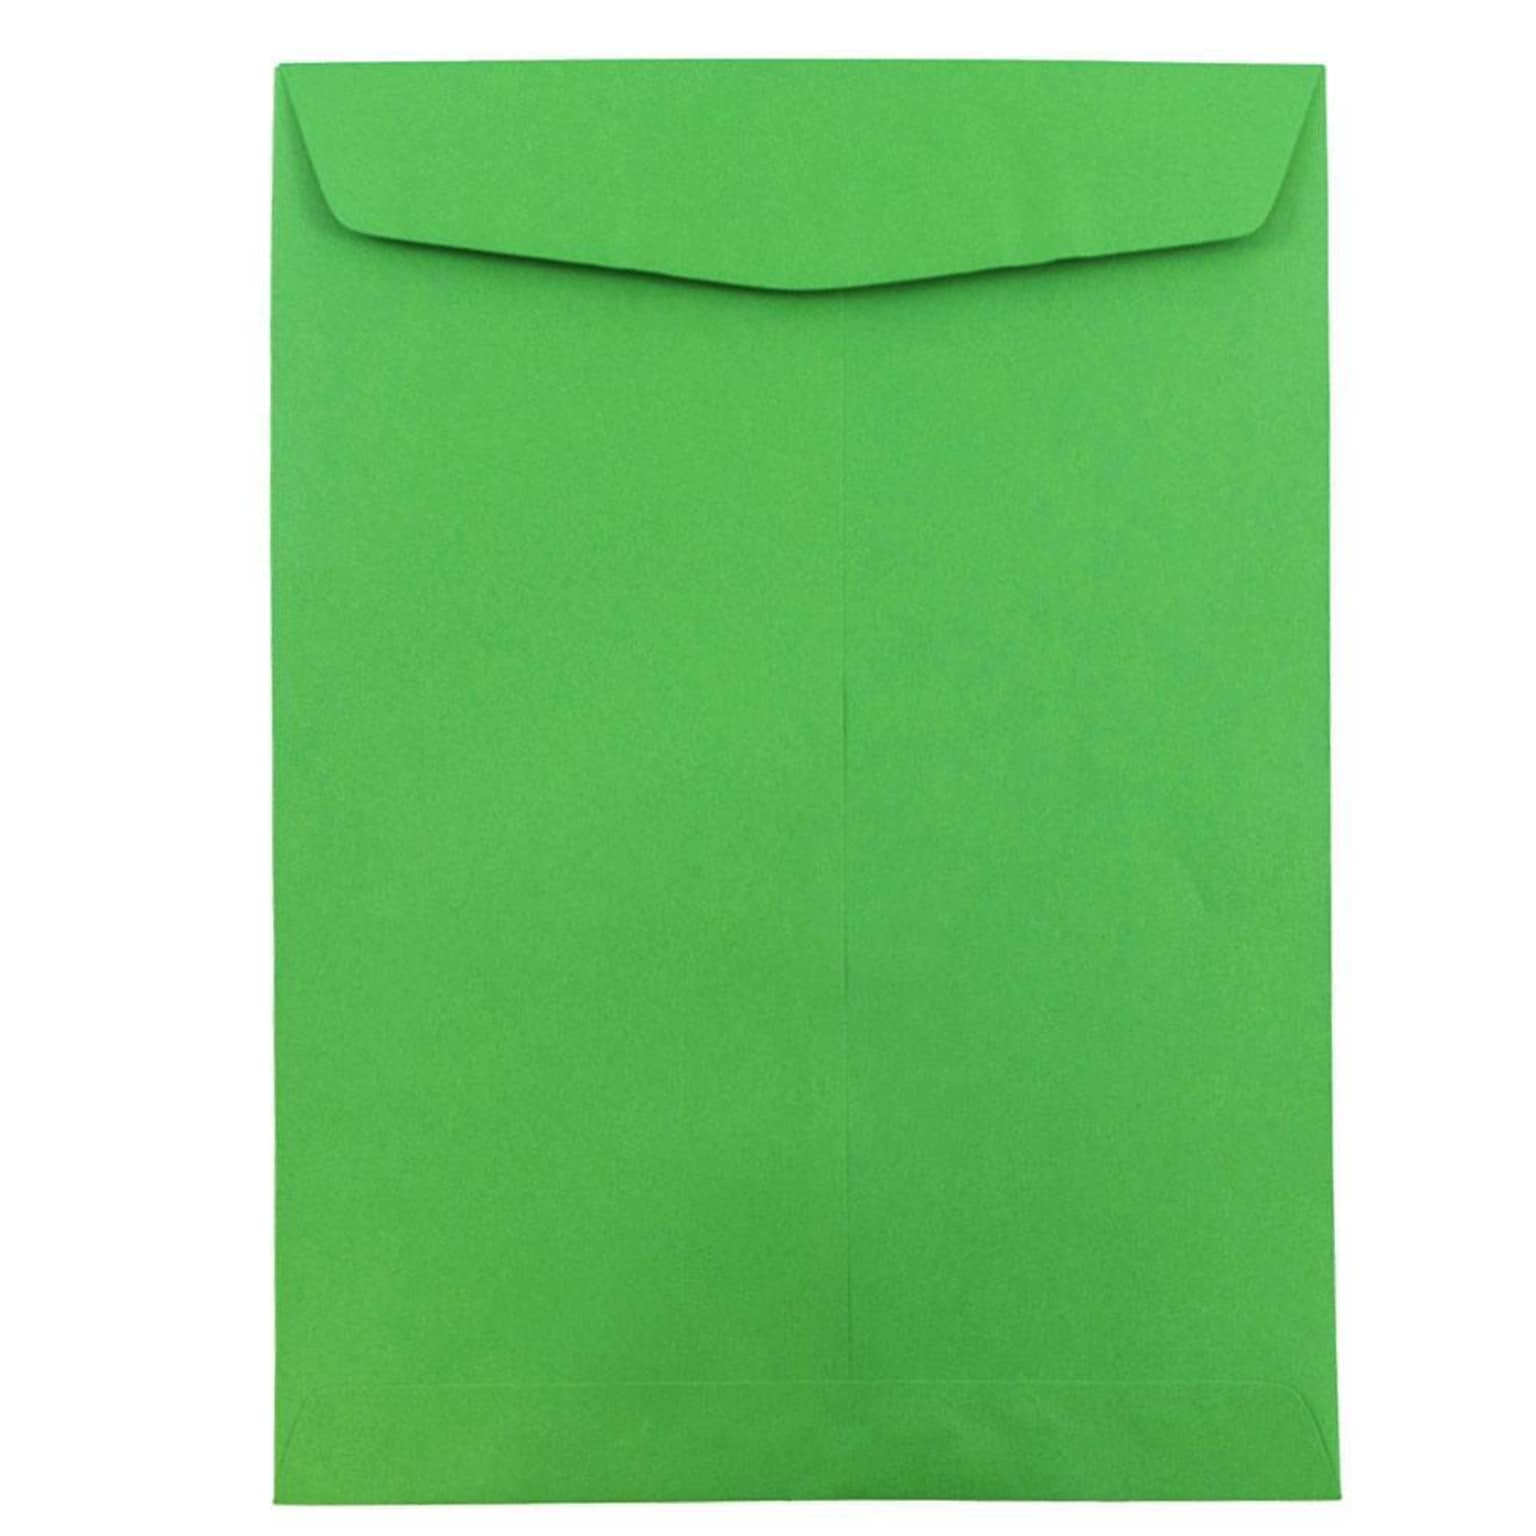 JAM Paper 9 x 12 Open End Catalog Colored Envelopes, Green Recycled, 25/Pack (80402a)